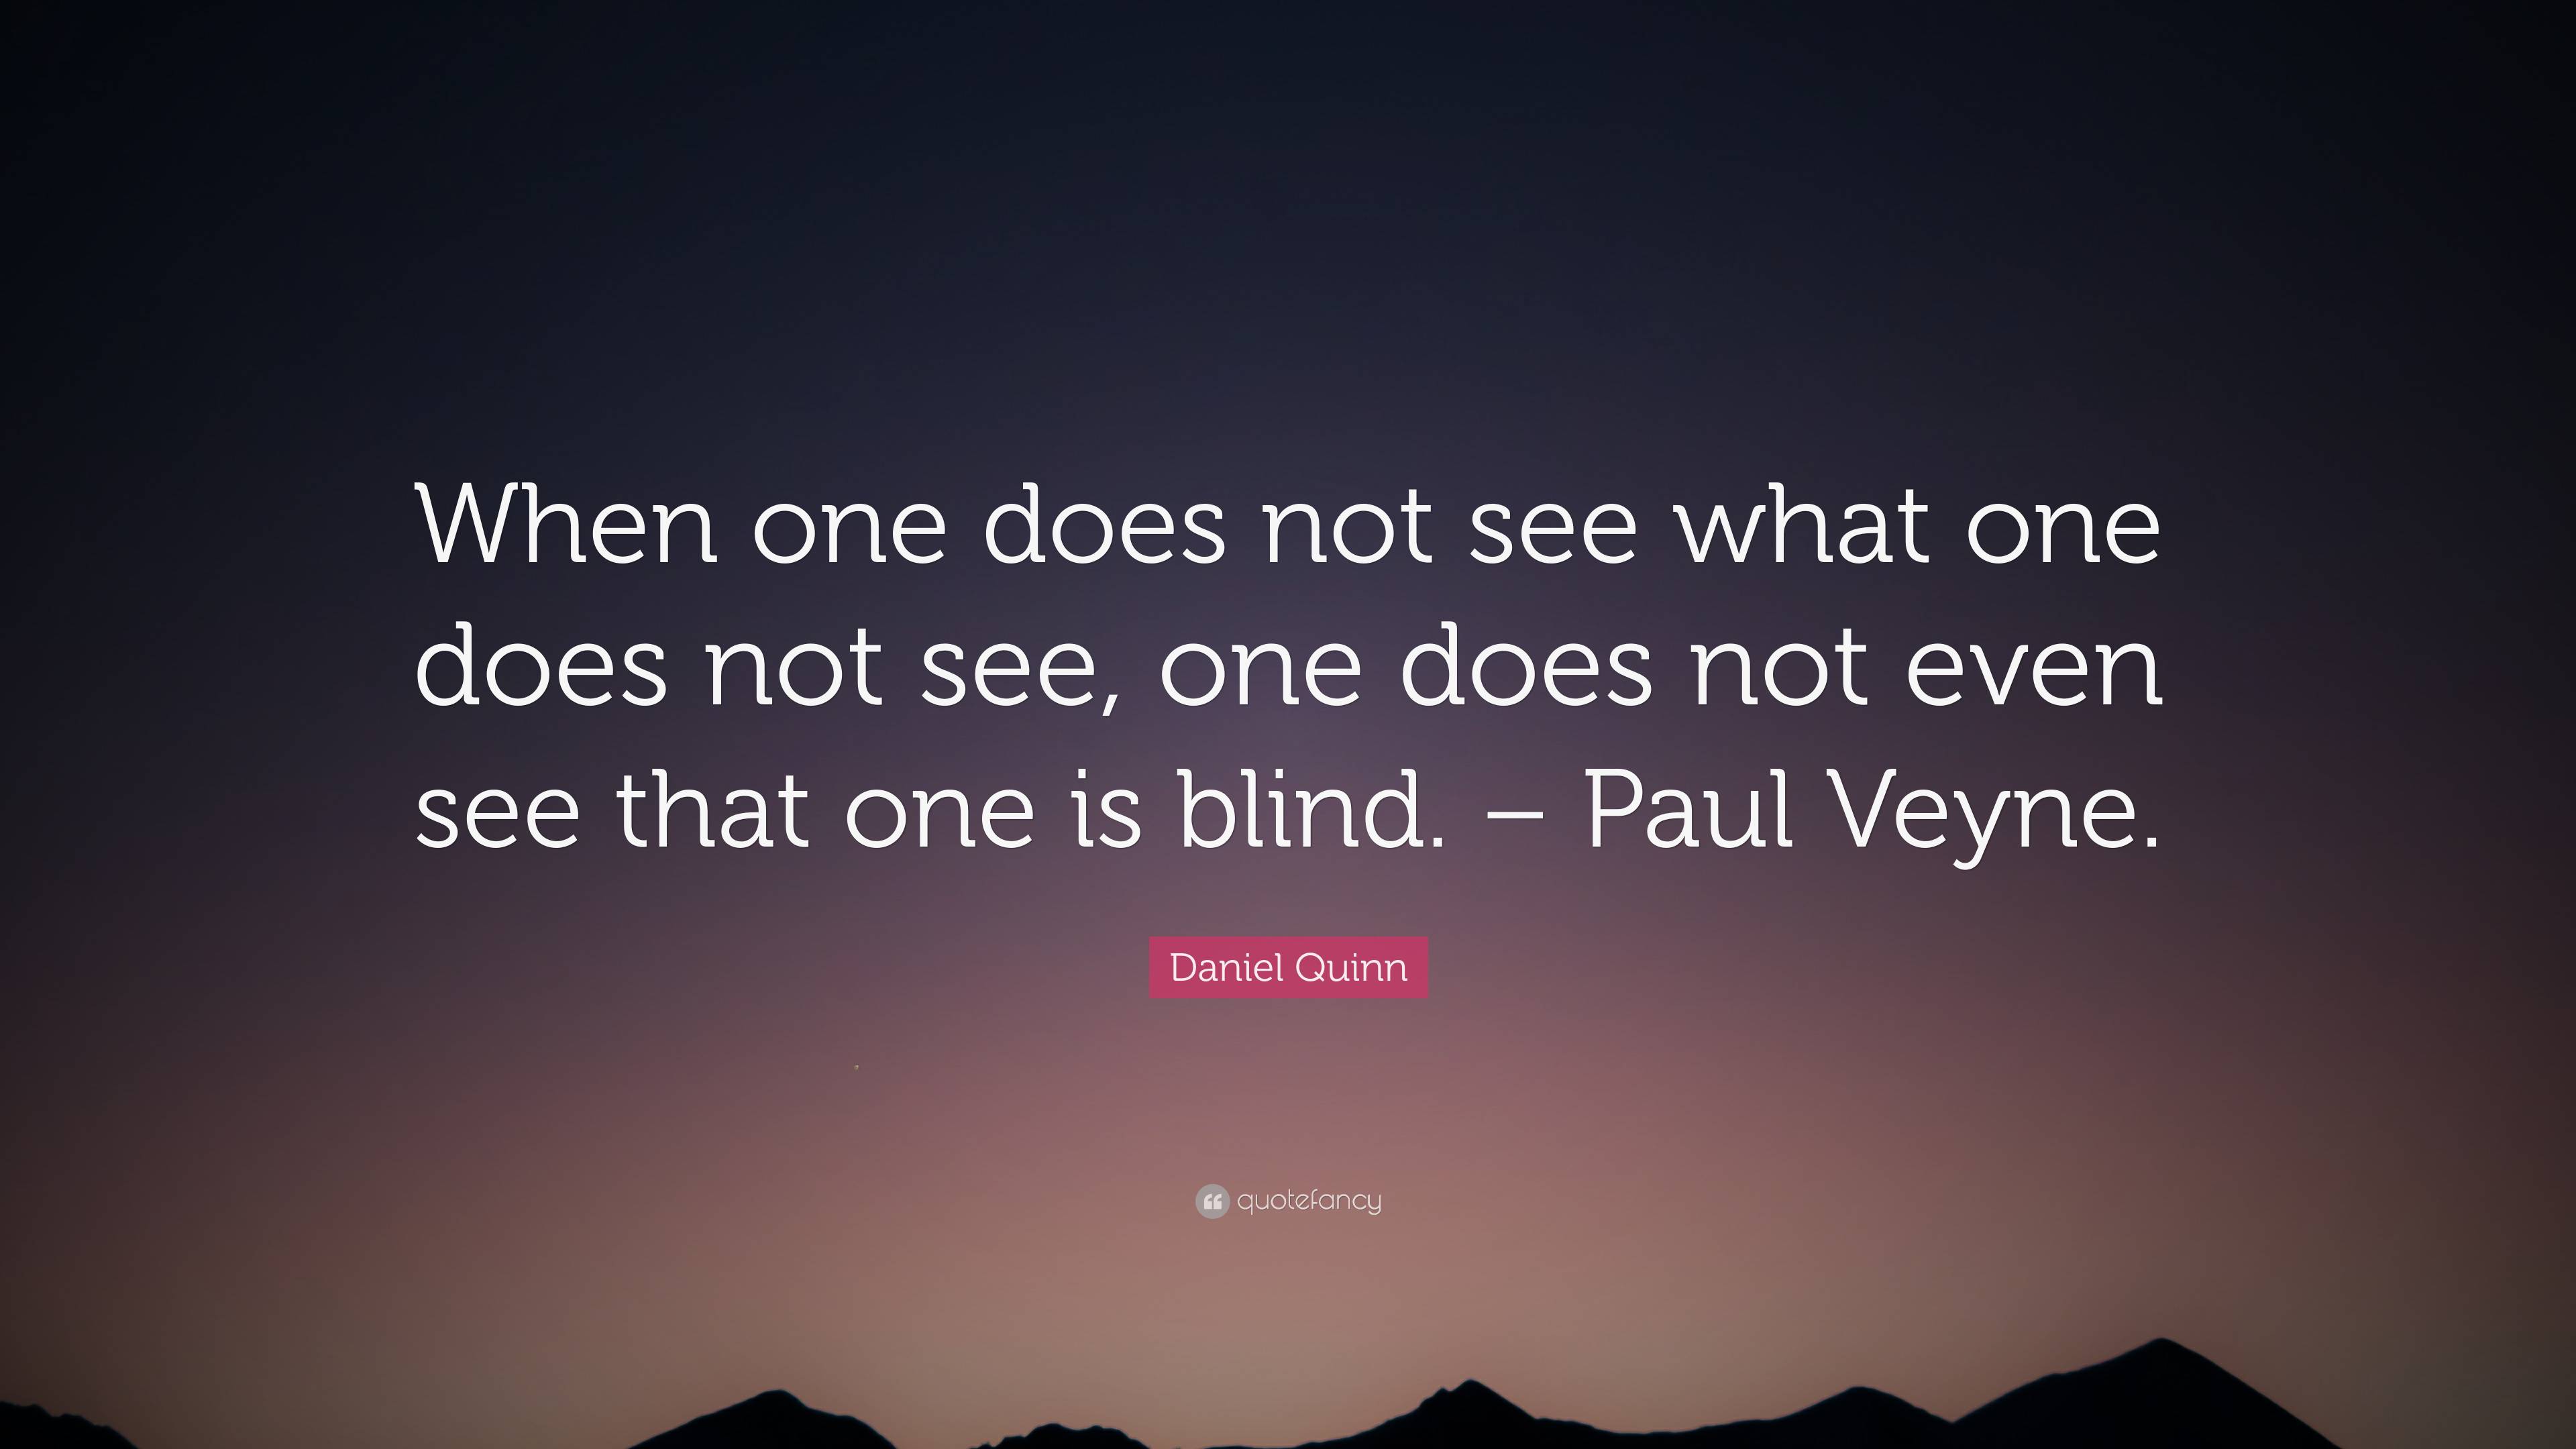 Daniel Quinn Quote: “When one does not see what one does not see, one ...